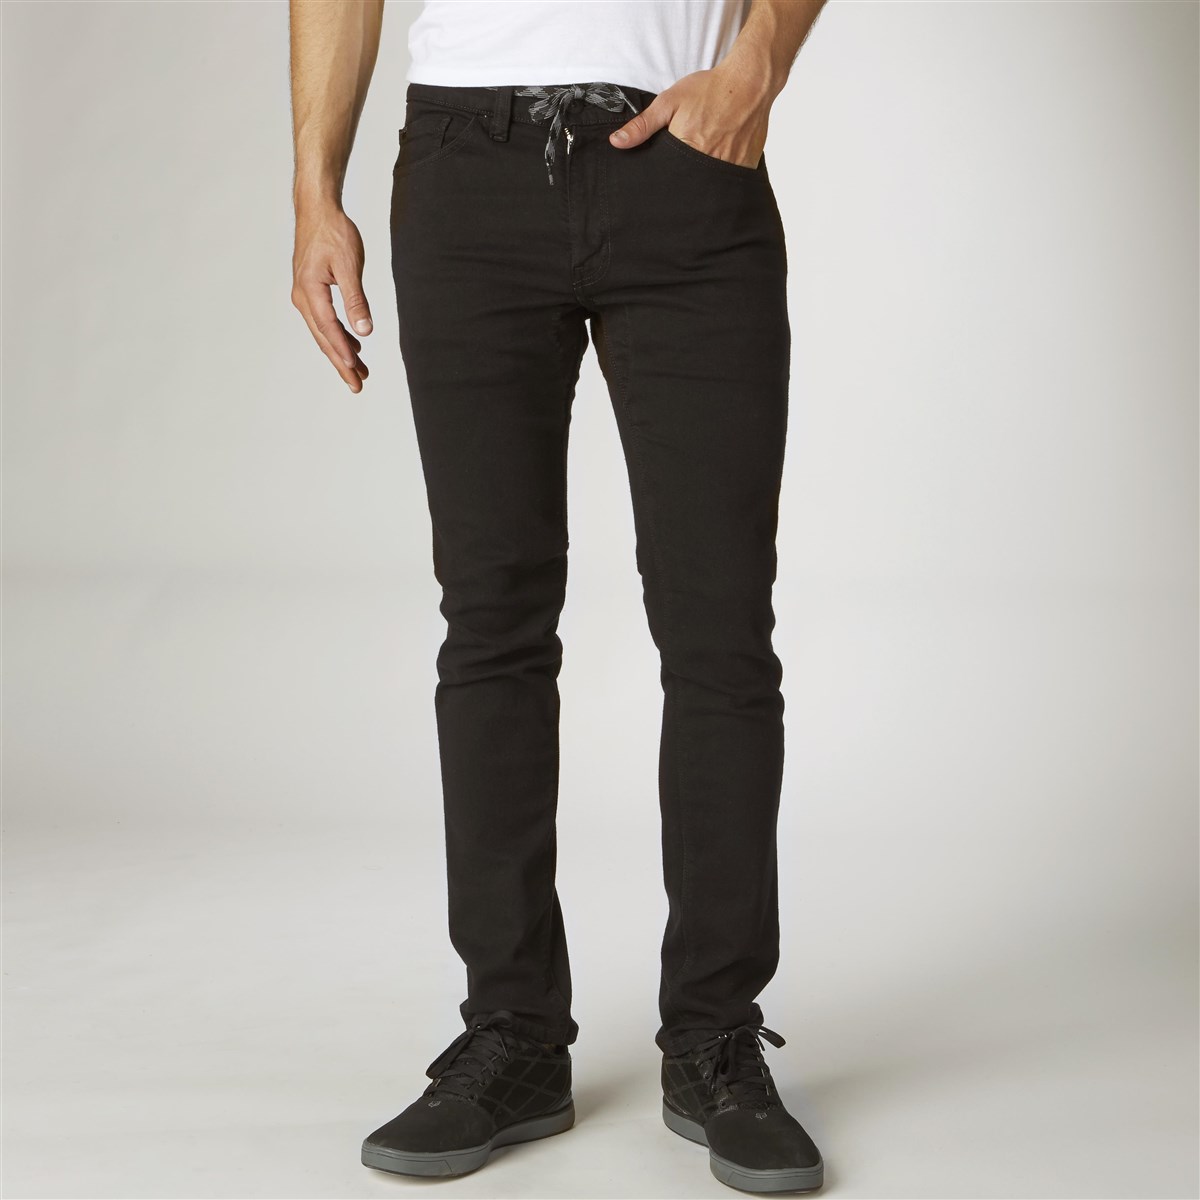 Fox Clothing Dagger Jean Trousers SS17 product image